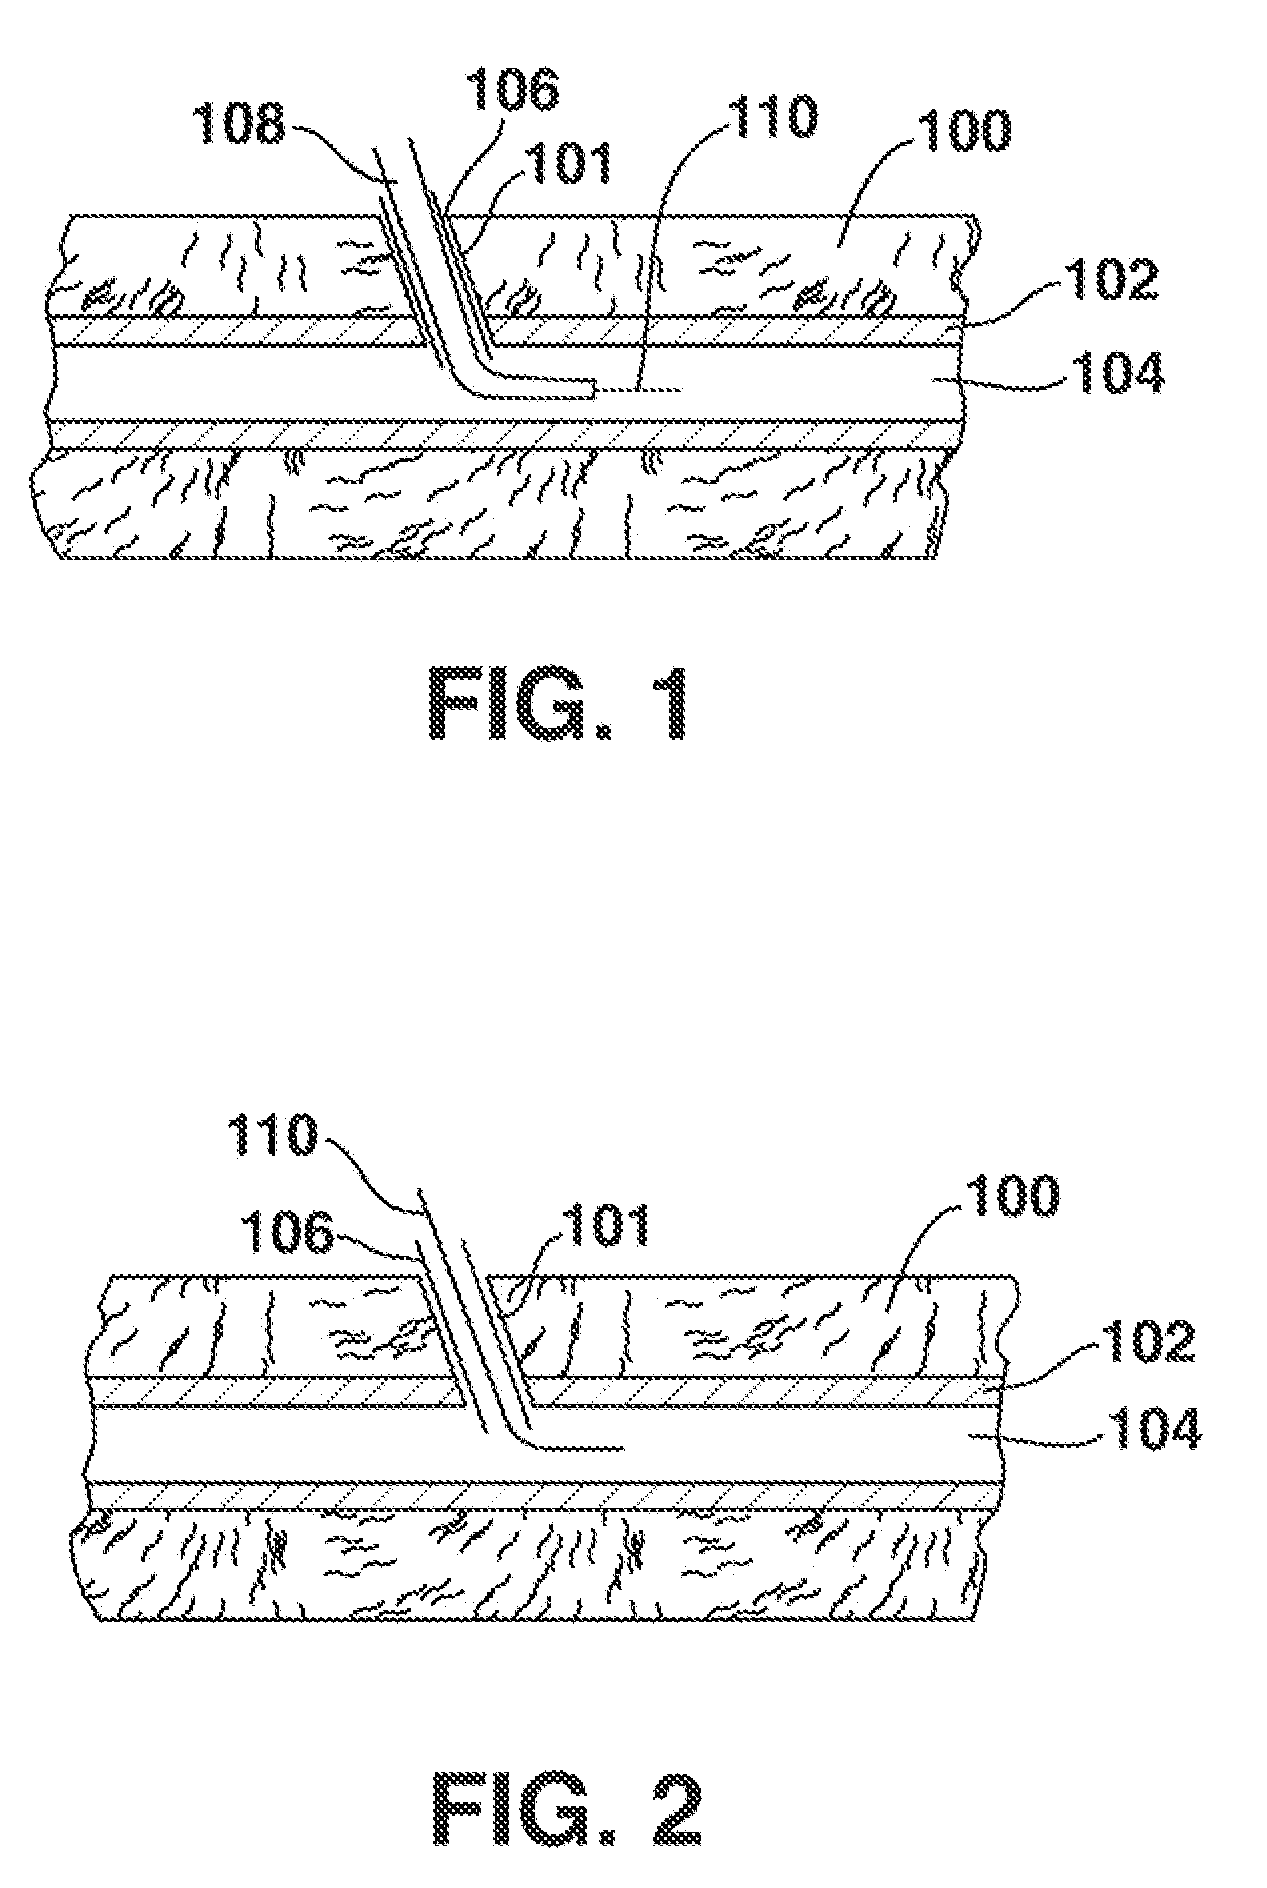 Low-profile vascular closure systems and methods of using same